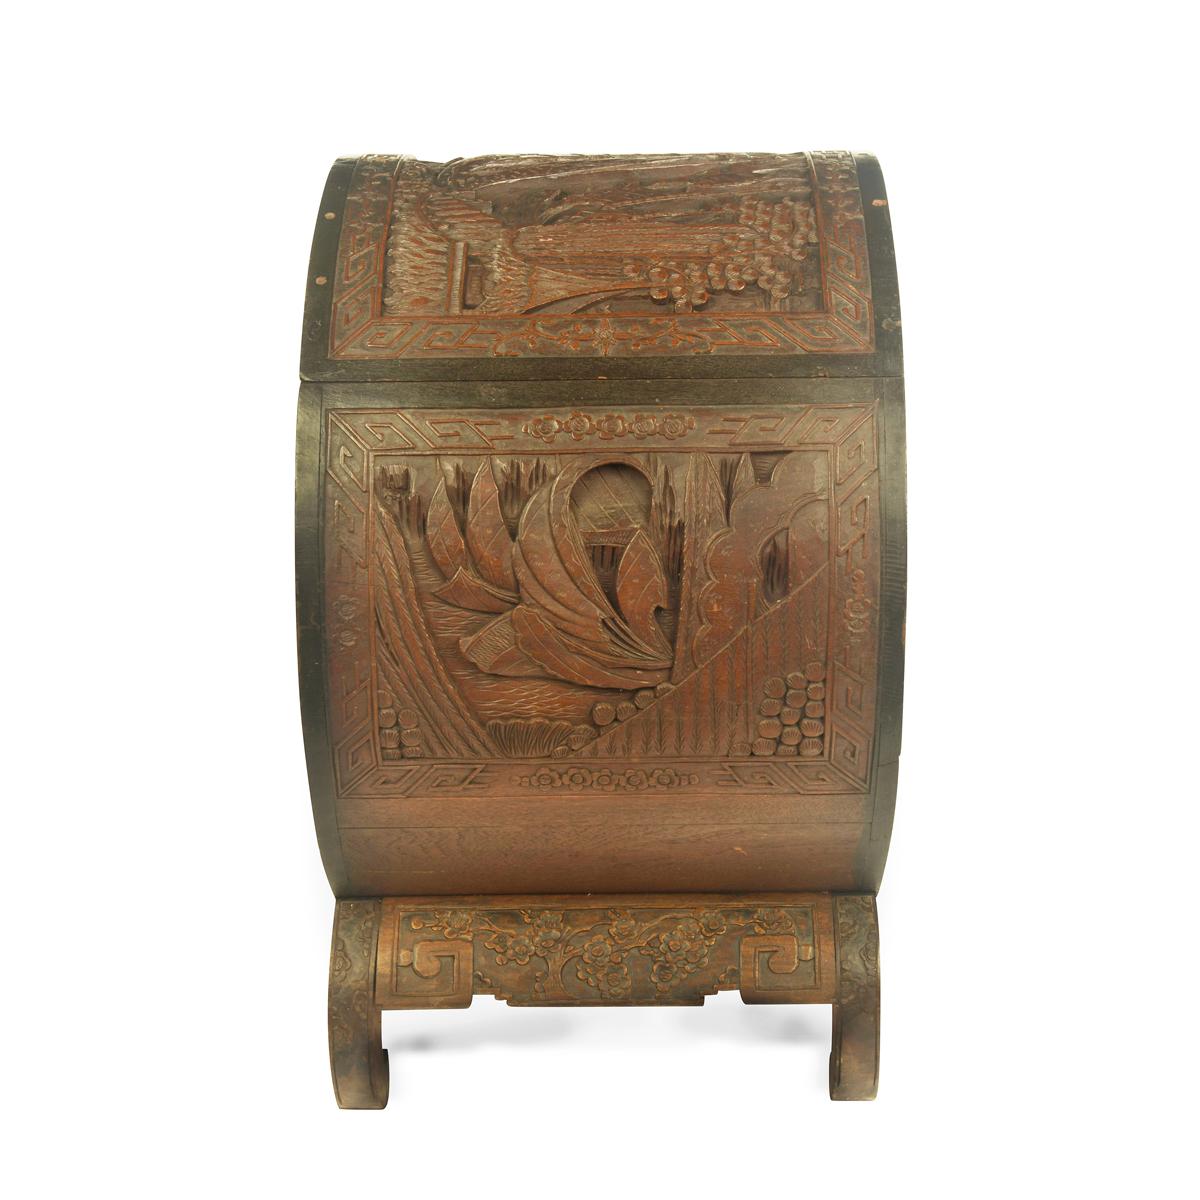 Wood A Hong Kong camphorwood cylindrical chest For Sale